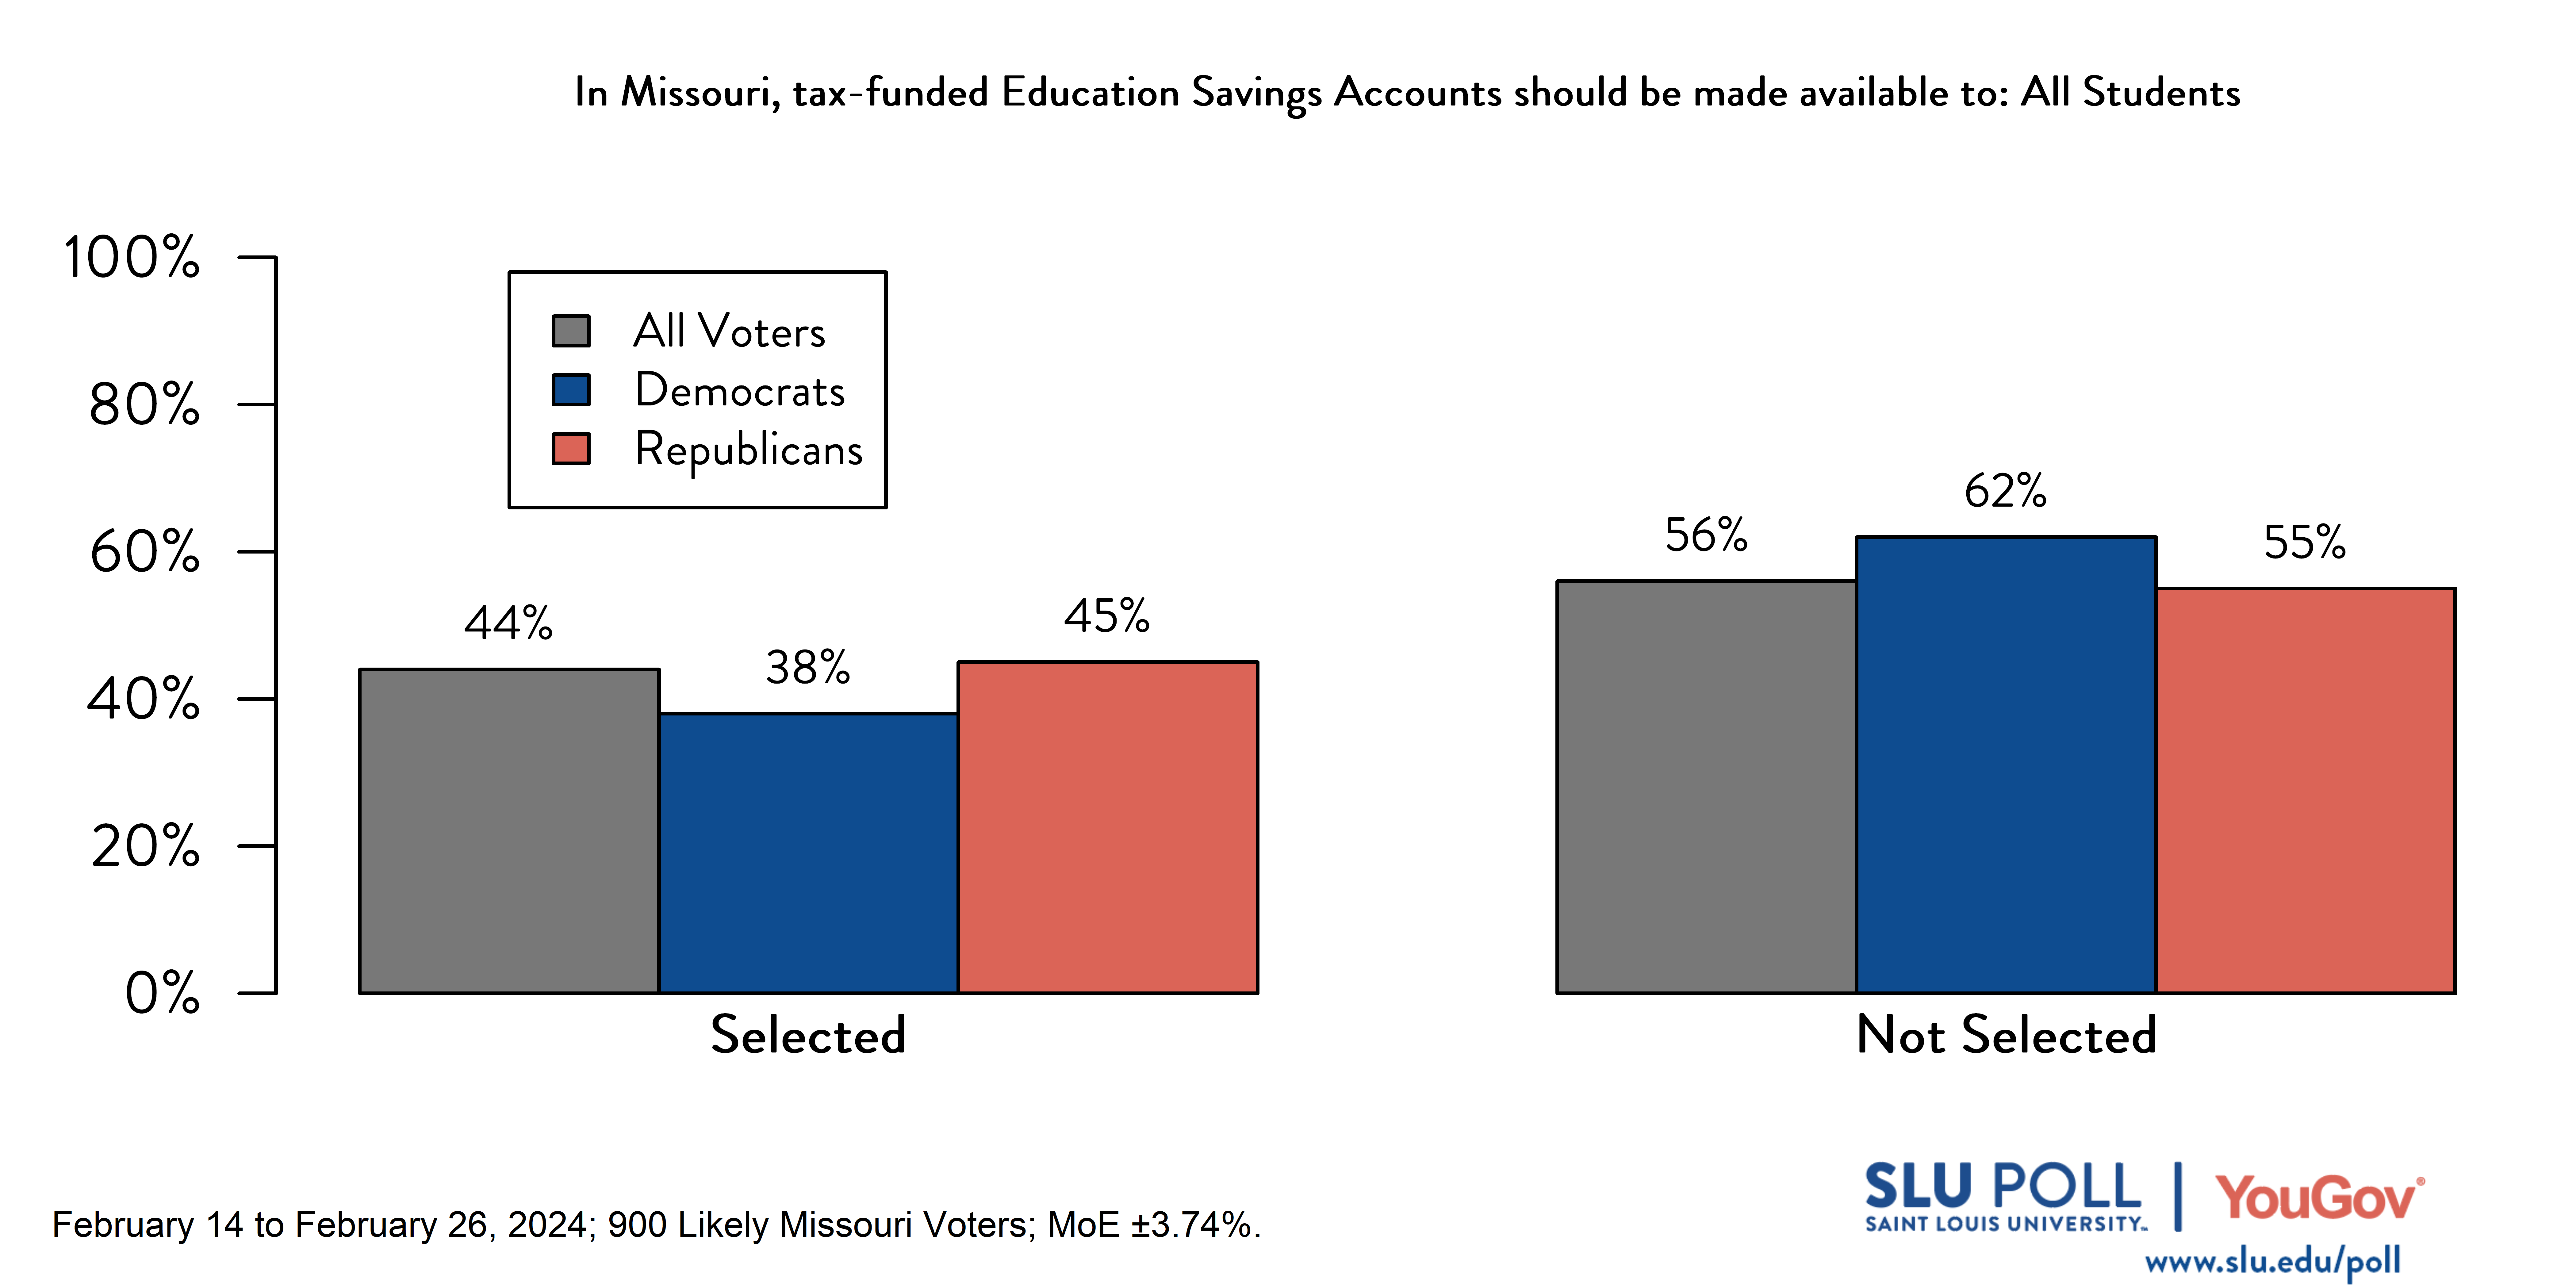 Likely voters' responses to 'In Missouri, tax-funded Education Savings Accounts should be made available to: All Students': 44% selected, and 56% not selected. Democratic voters' responses: ' 38% selected, and 62% not selected. Republican voters' responses:  45% selected, and 55% not selected.